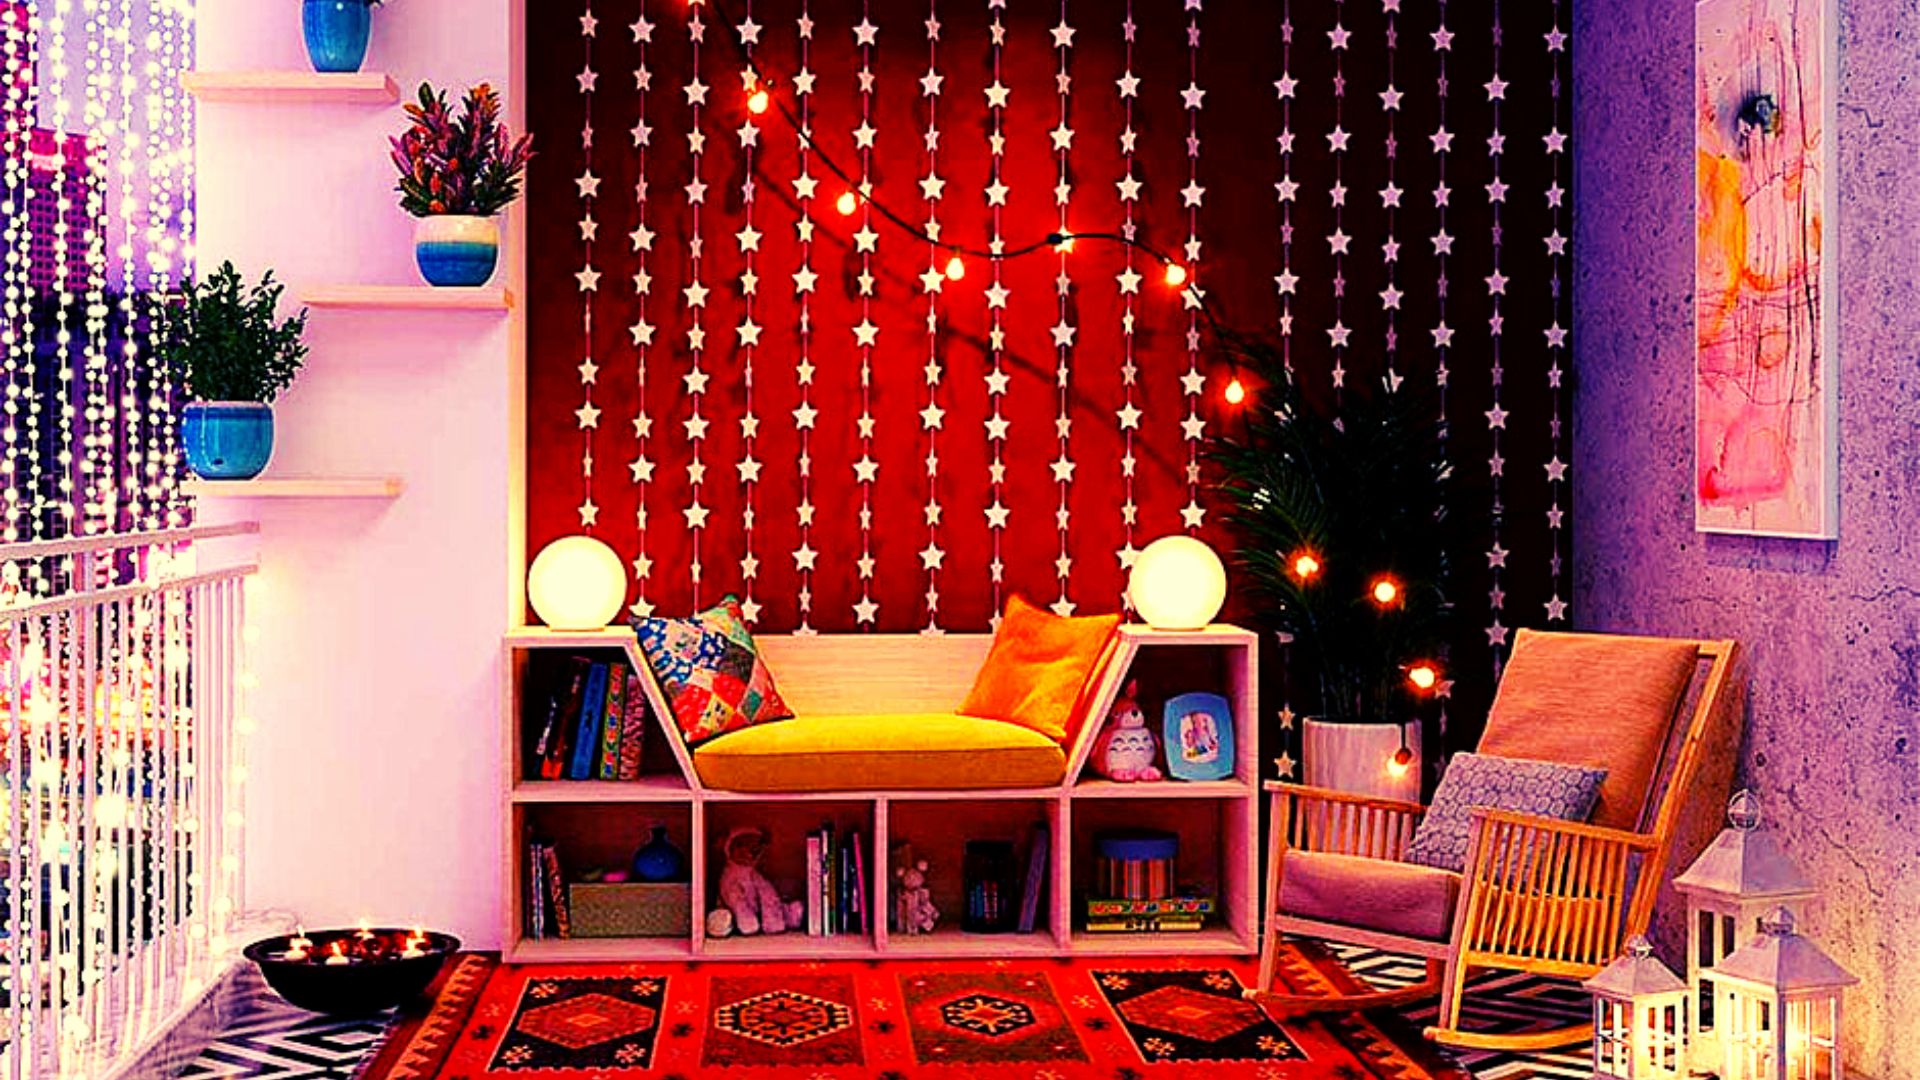 Top 10 Ideas for Decorating your Home on Diwali